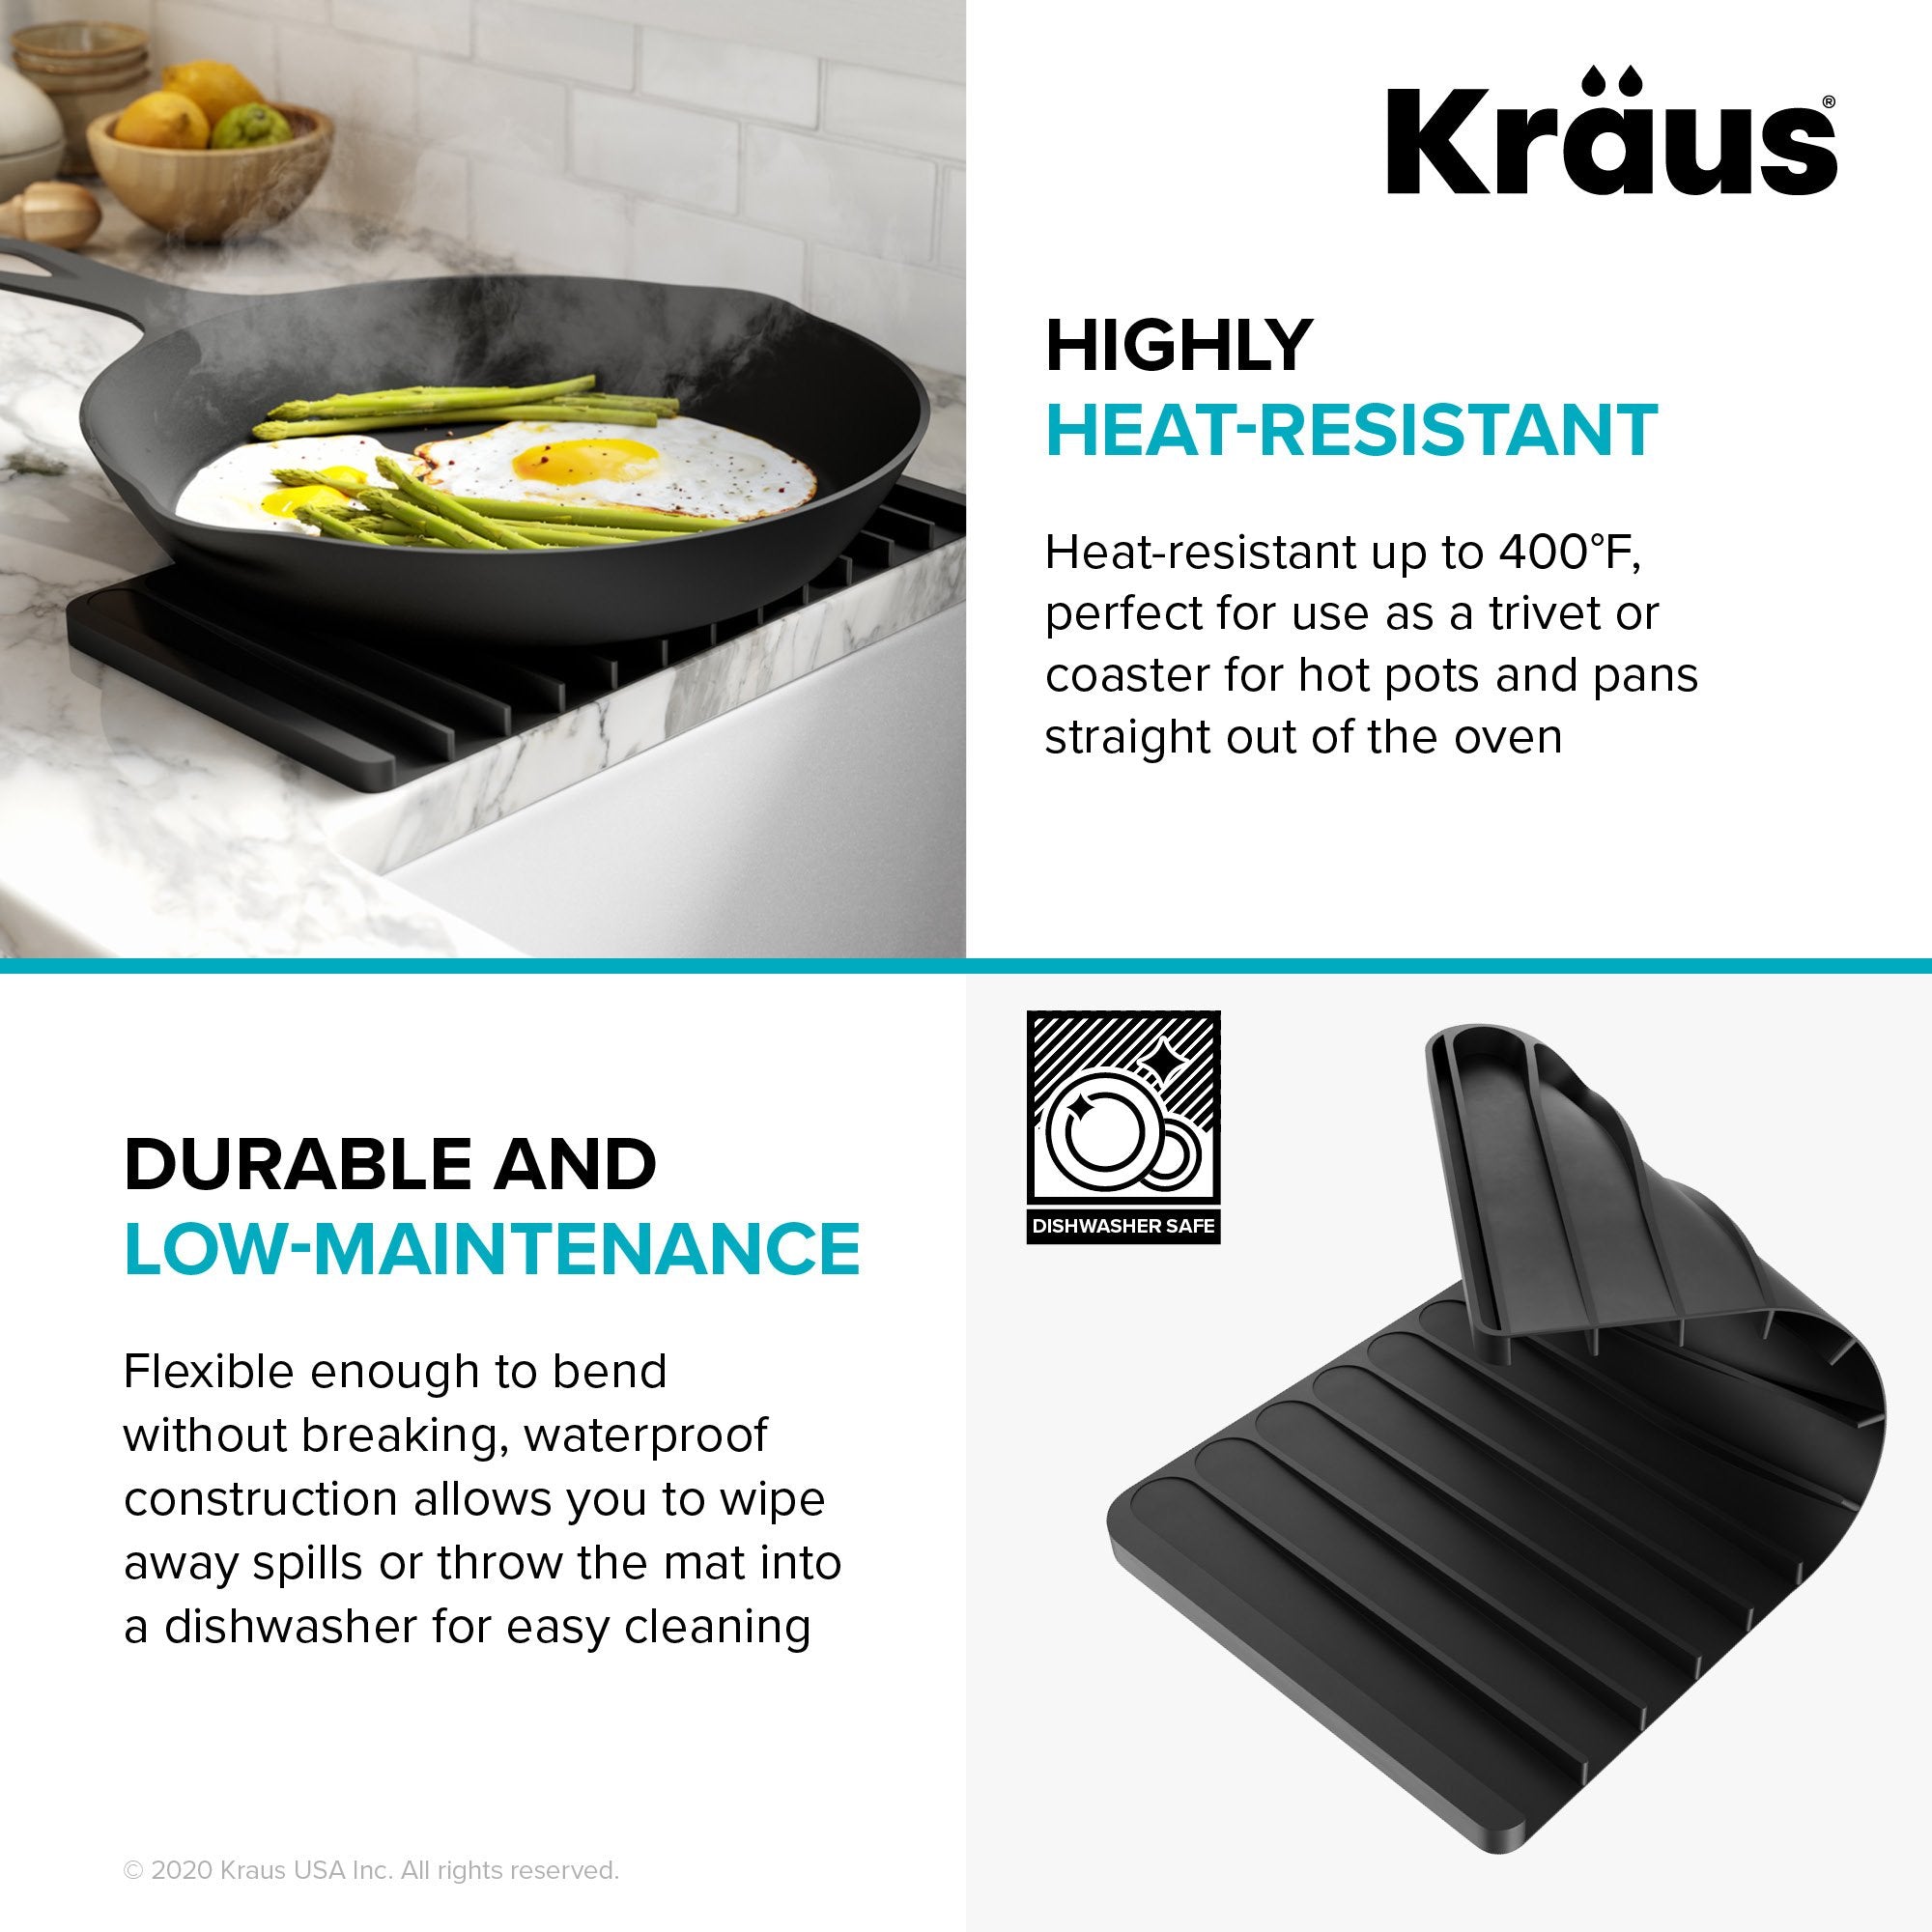 Kraus KDM-10LG Self-Draining Silicone Dish Drying Mat or Trivet for Kitchen Counter in Light Grey